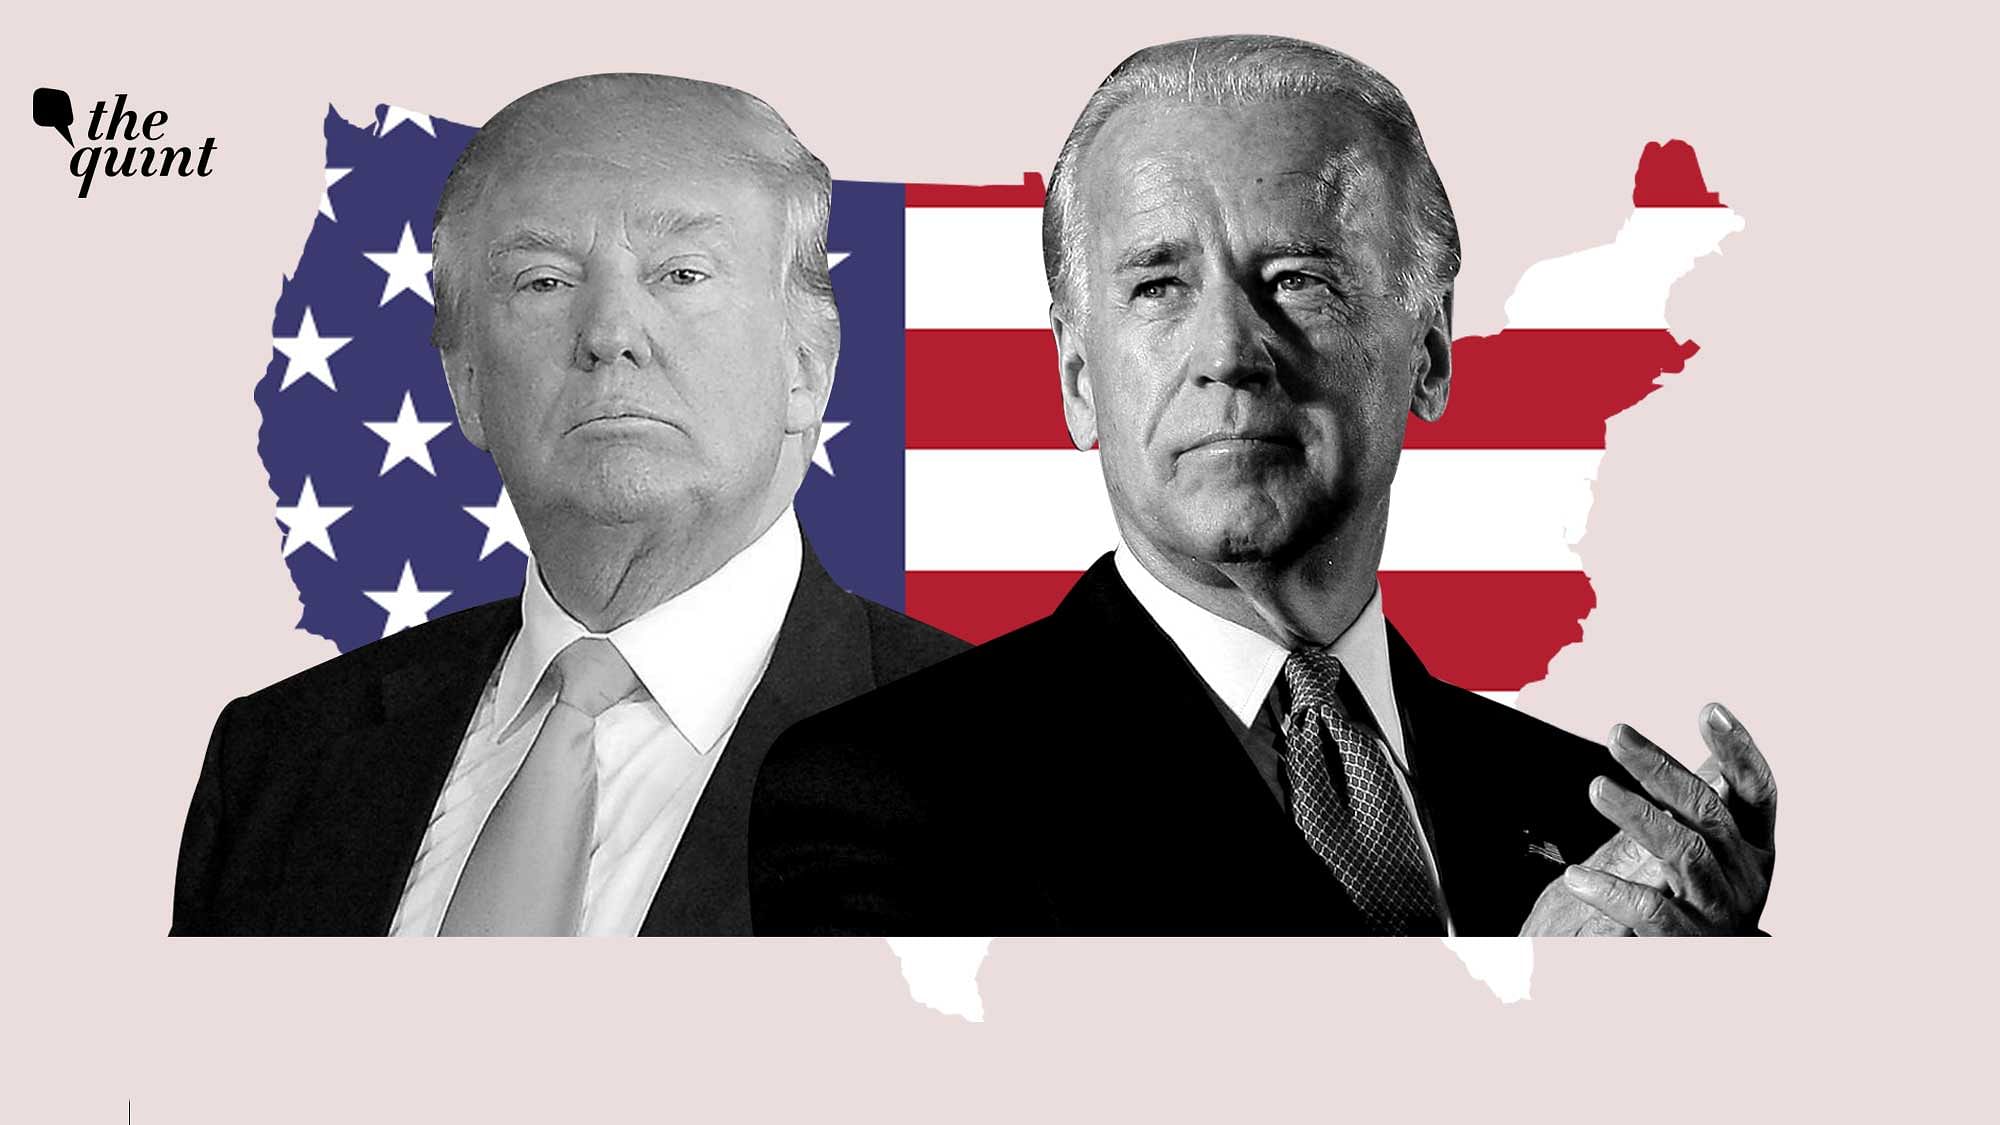 According to a poll of polls presented by the BBC, Biden is ahead of Trump by at least 9 percent nationally.&nbsp;